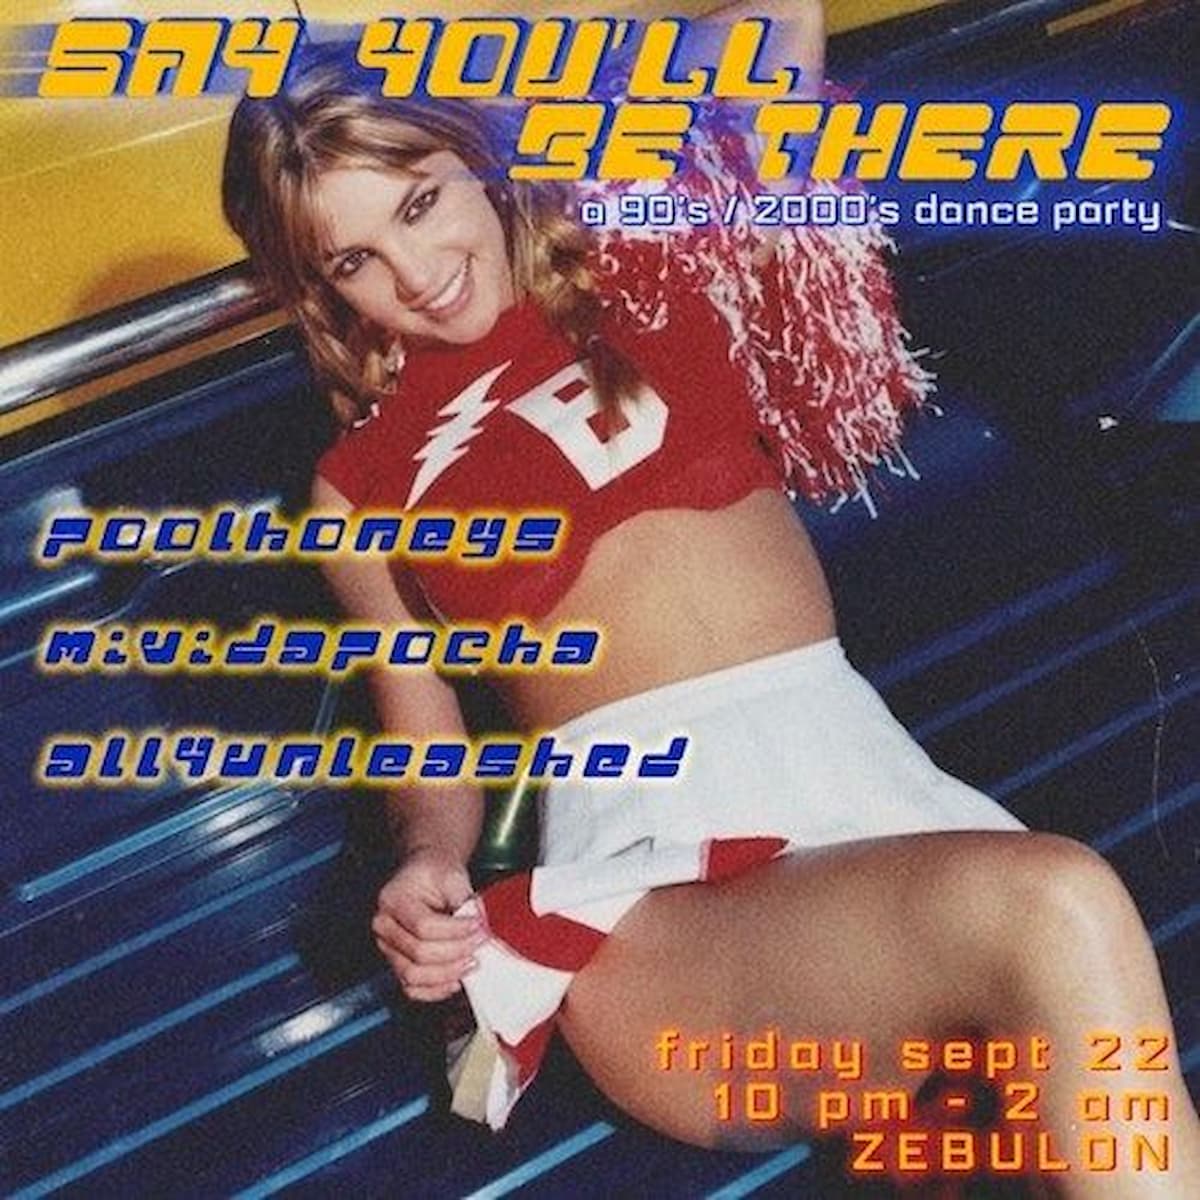 Say You'll Be There: A 90s/2000s Dance Party